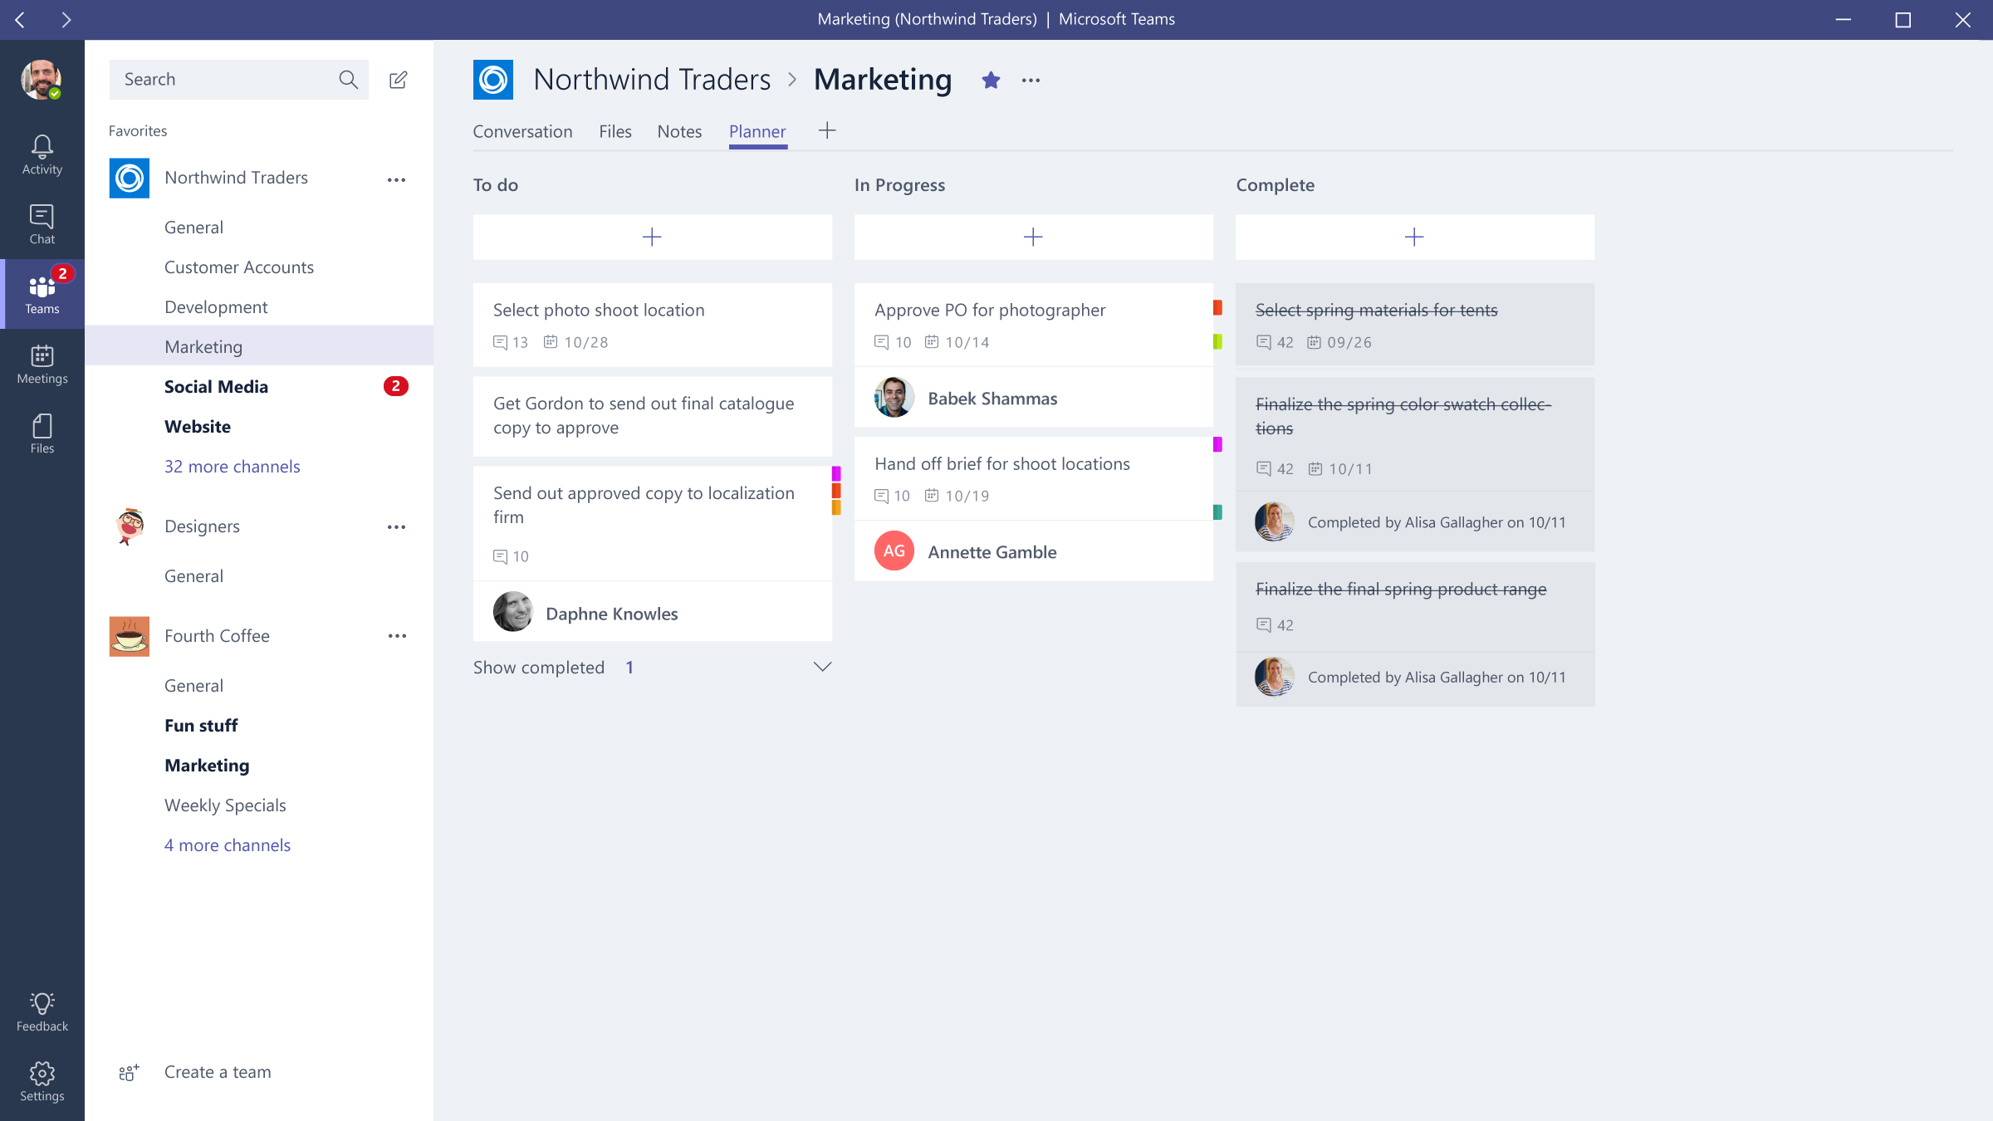 Microsoft Teams Review: Features and Benefits for Remote Work - 5